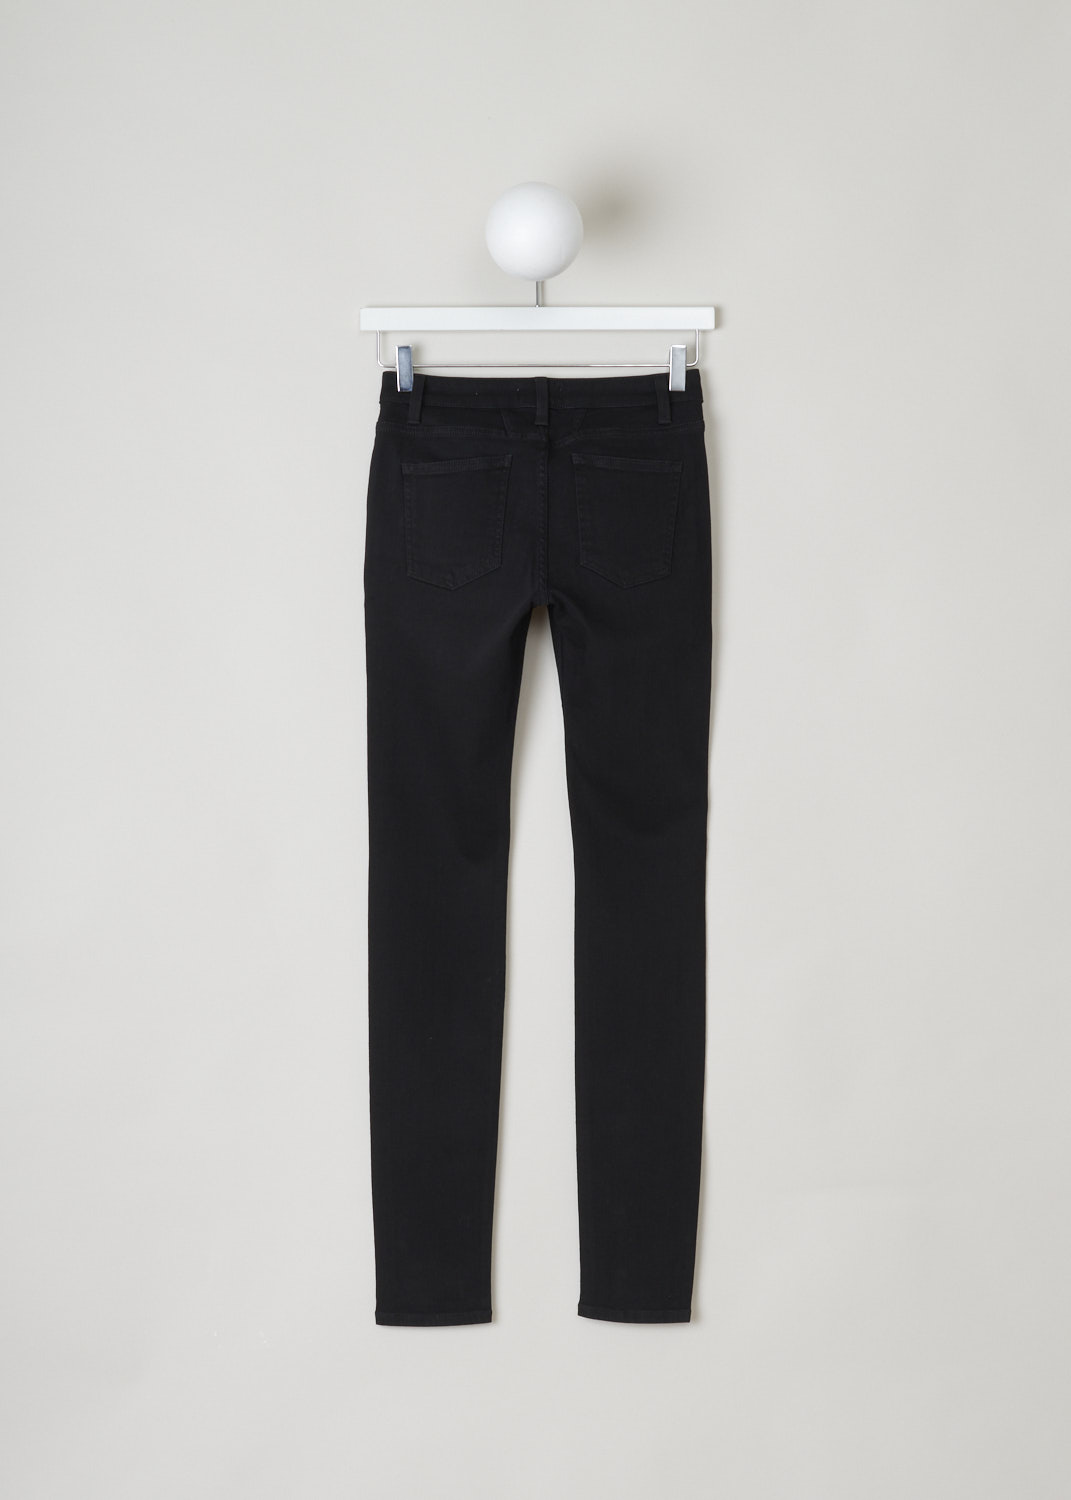 Closed, Black skinny lizzy jeans, lizzy_C91099_0E3_ED_ED, black, back, All black 5-pocket jeans comes in a skinny fit, and mid-waist height. The cotton blend used for this model is know for its high elasticity.